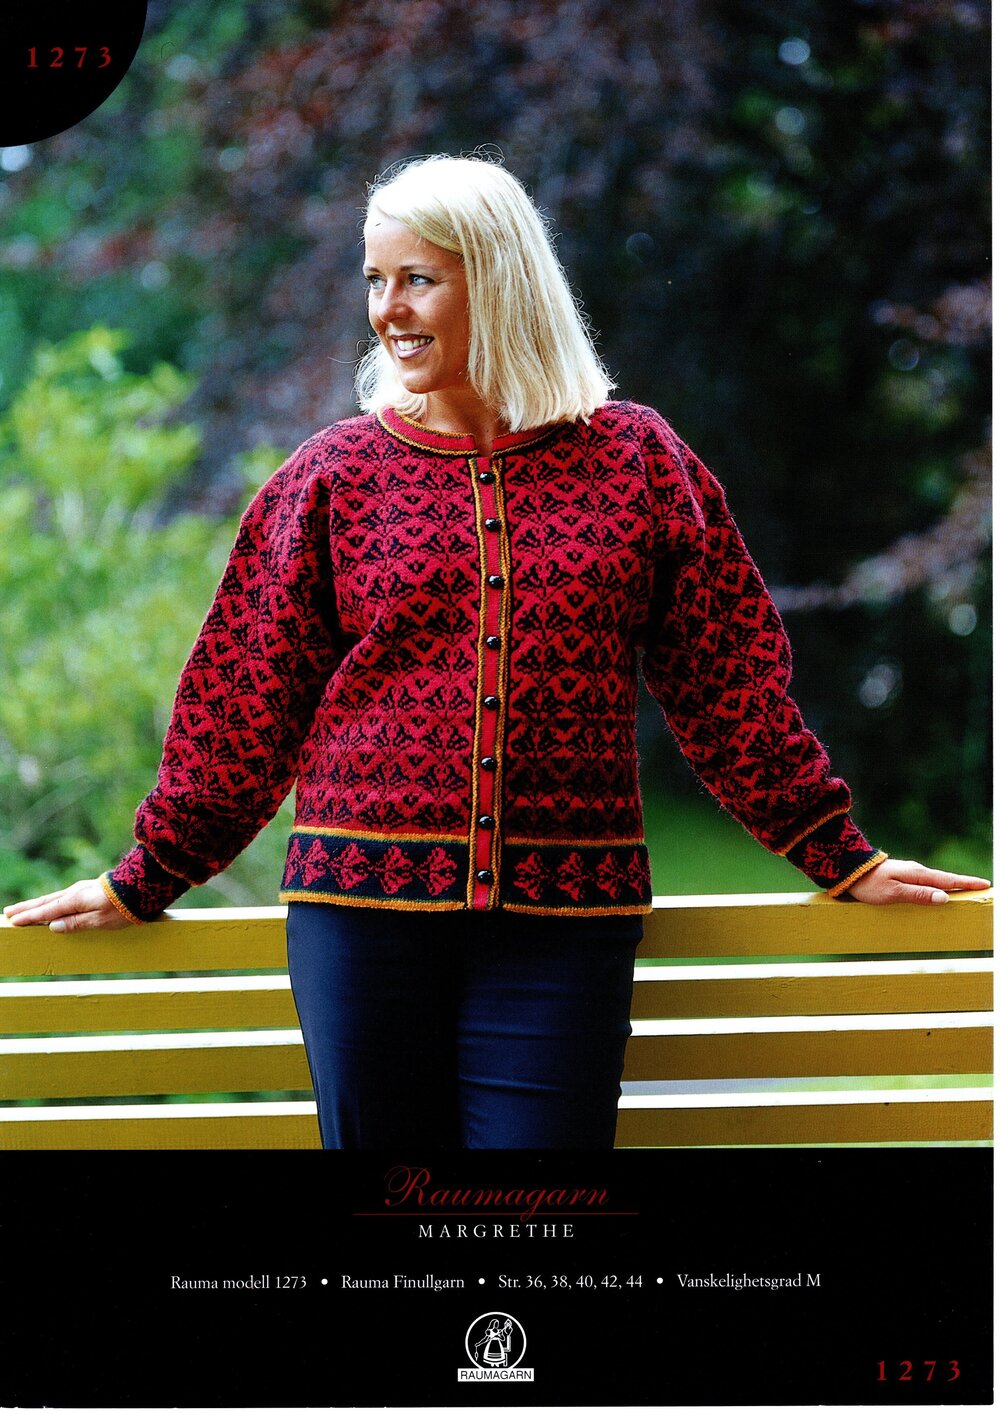 Knitting patterns  Large collection of Nordic knitting patterns